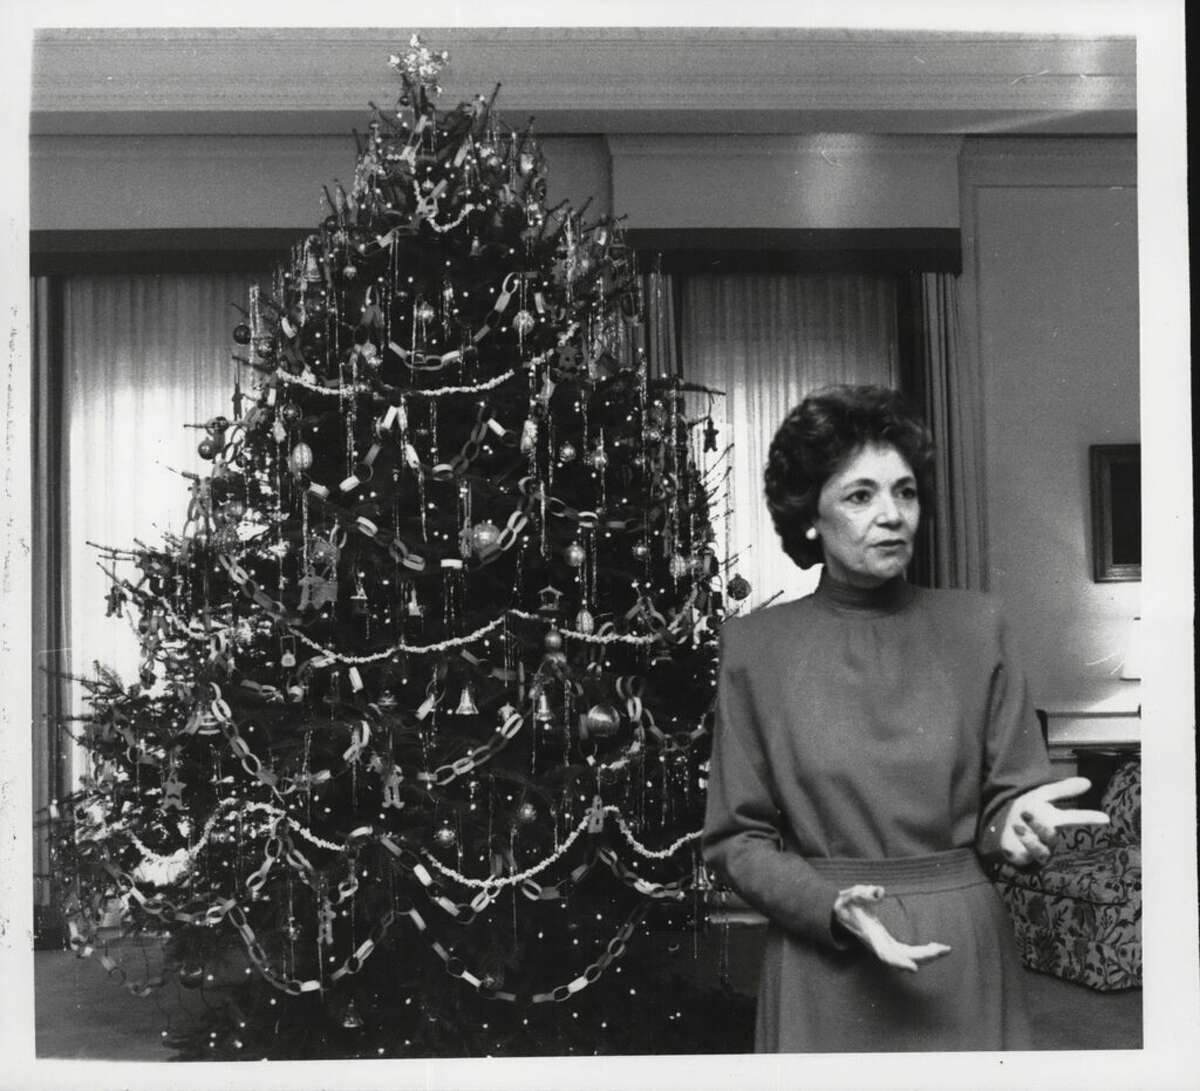 Matilda Cuomo at the New York Governor's Mansion on Dec. 17, 1985. (Roberta Smith/Times Union Archive)